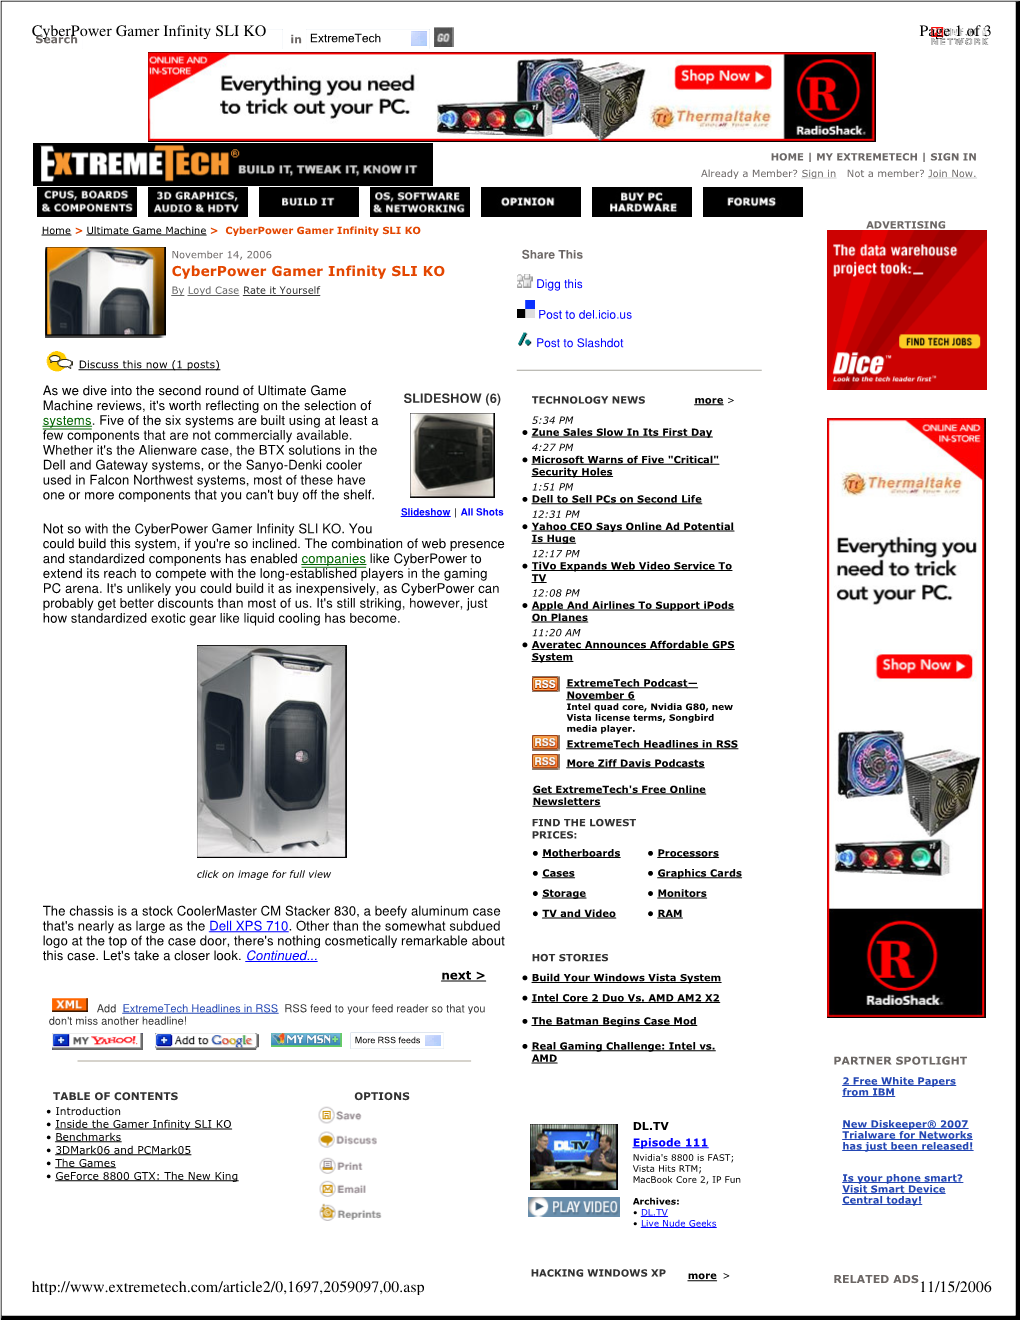 Cyberpower Gamer Infinity SLI KO Page 1 of 3 Search in Extremetech